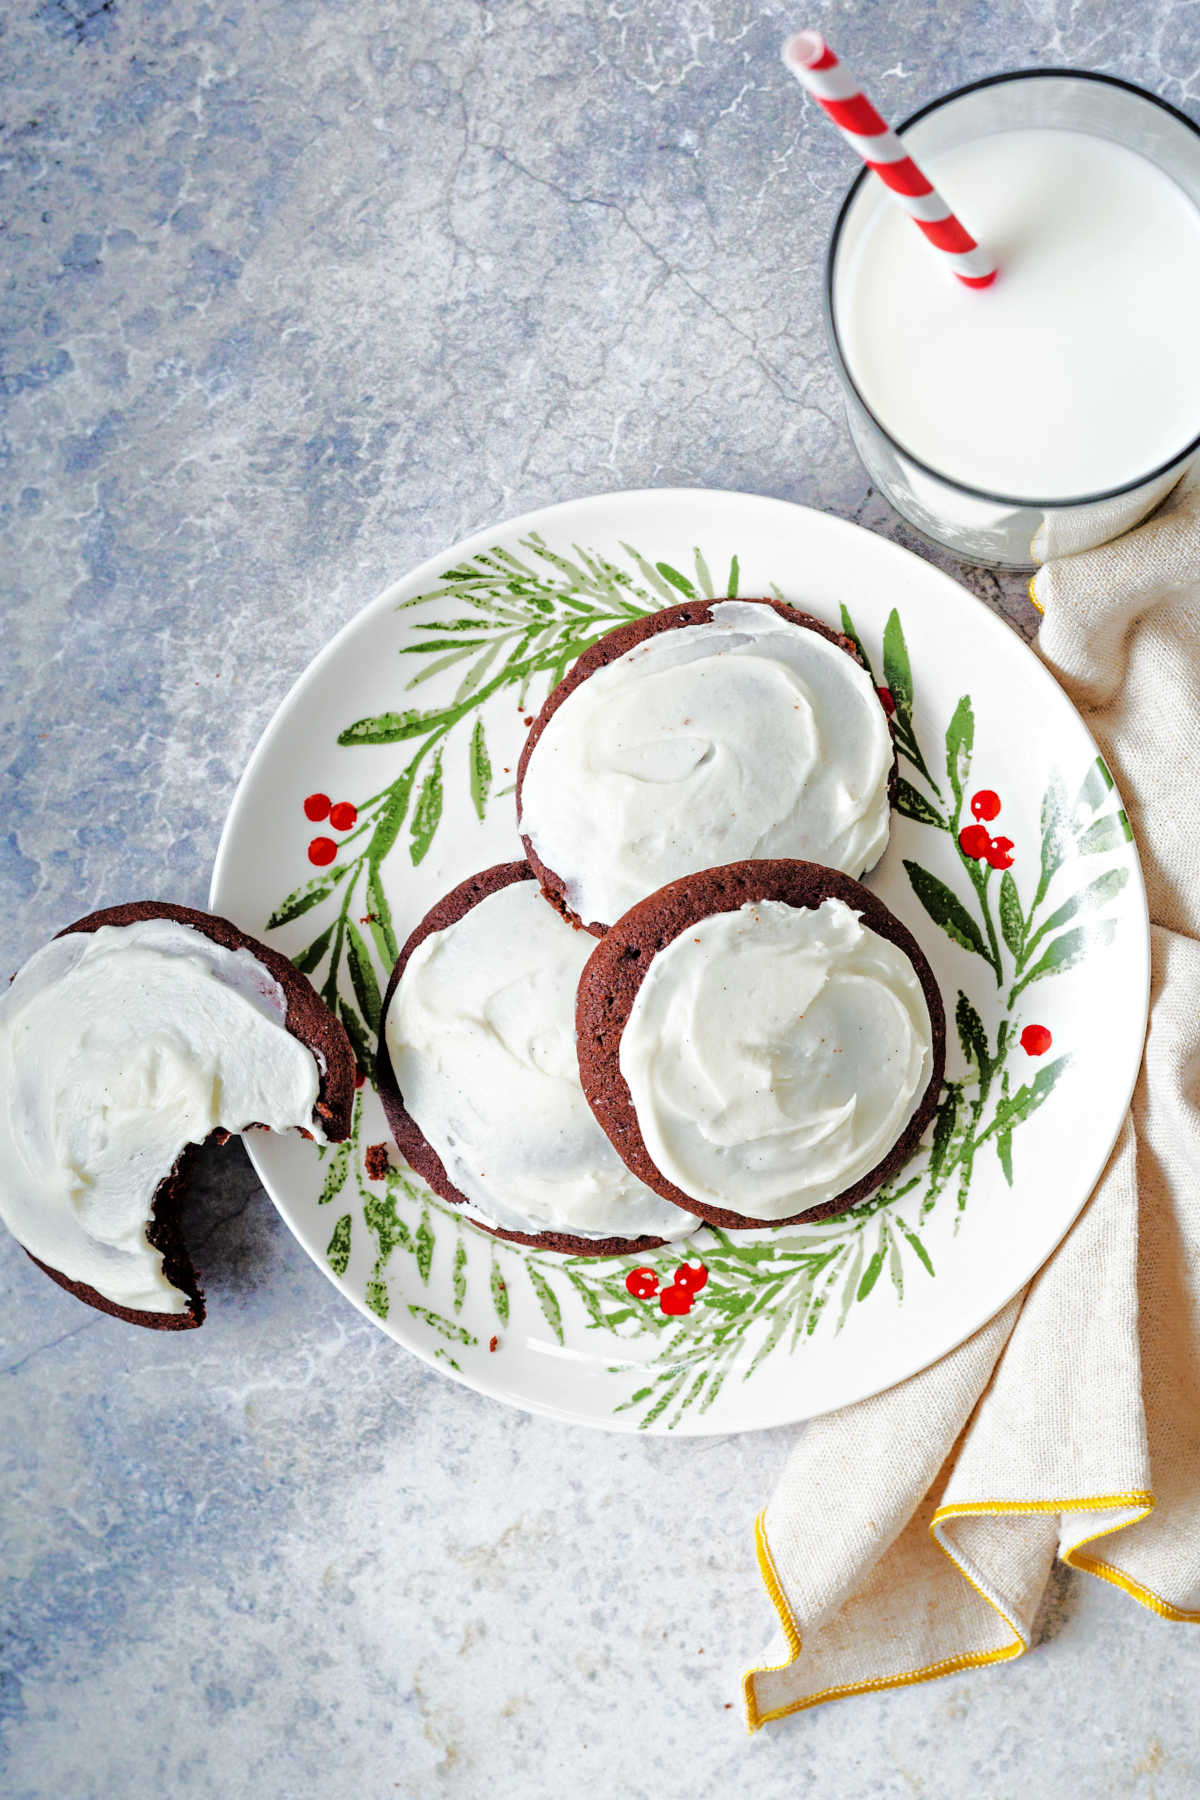 frosted chocolate drop cookies on a holiday plate with a glass of milk in the background.